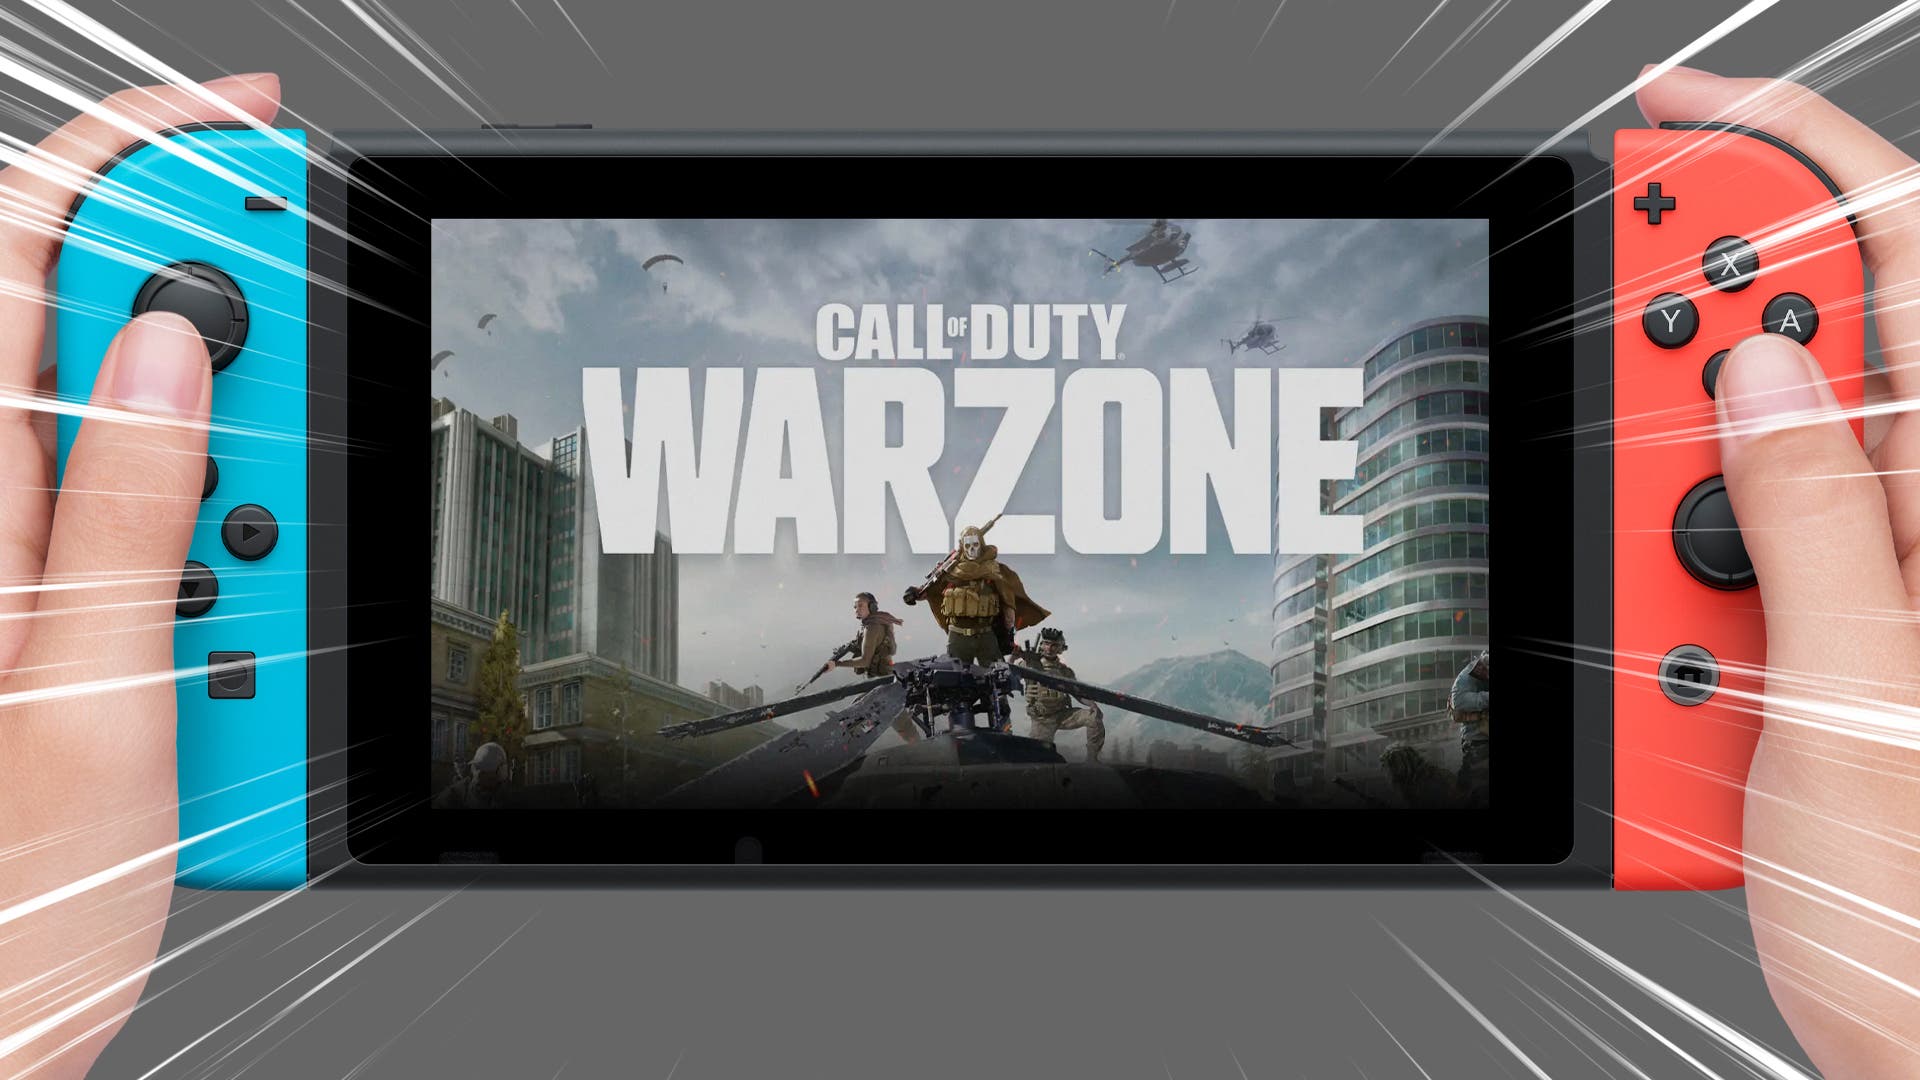 Warzone is fully FUNCTIONAL on Nintendo Switch: Microsoft assures that the latest Call of Duty will work correctly on the hybrid console